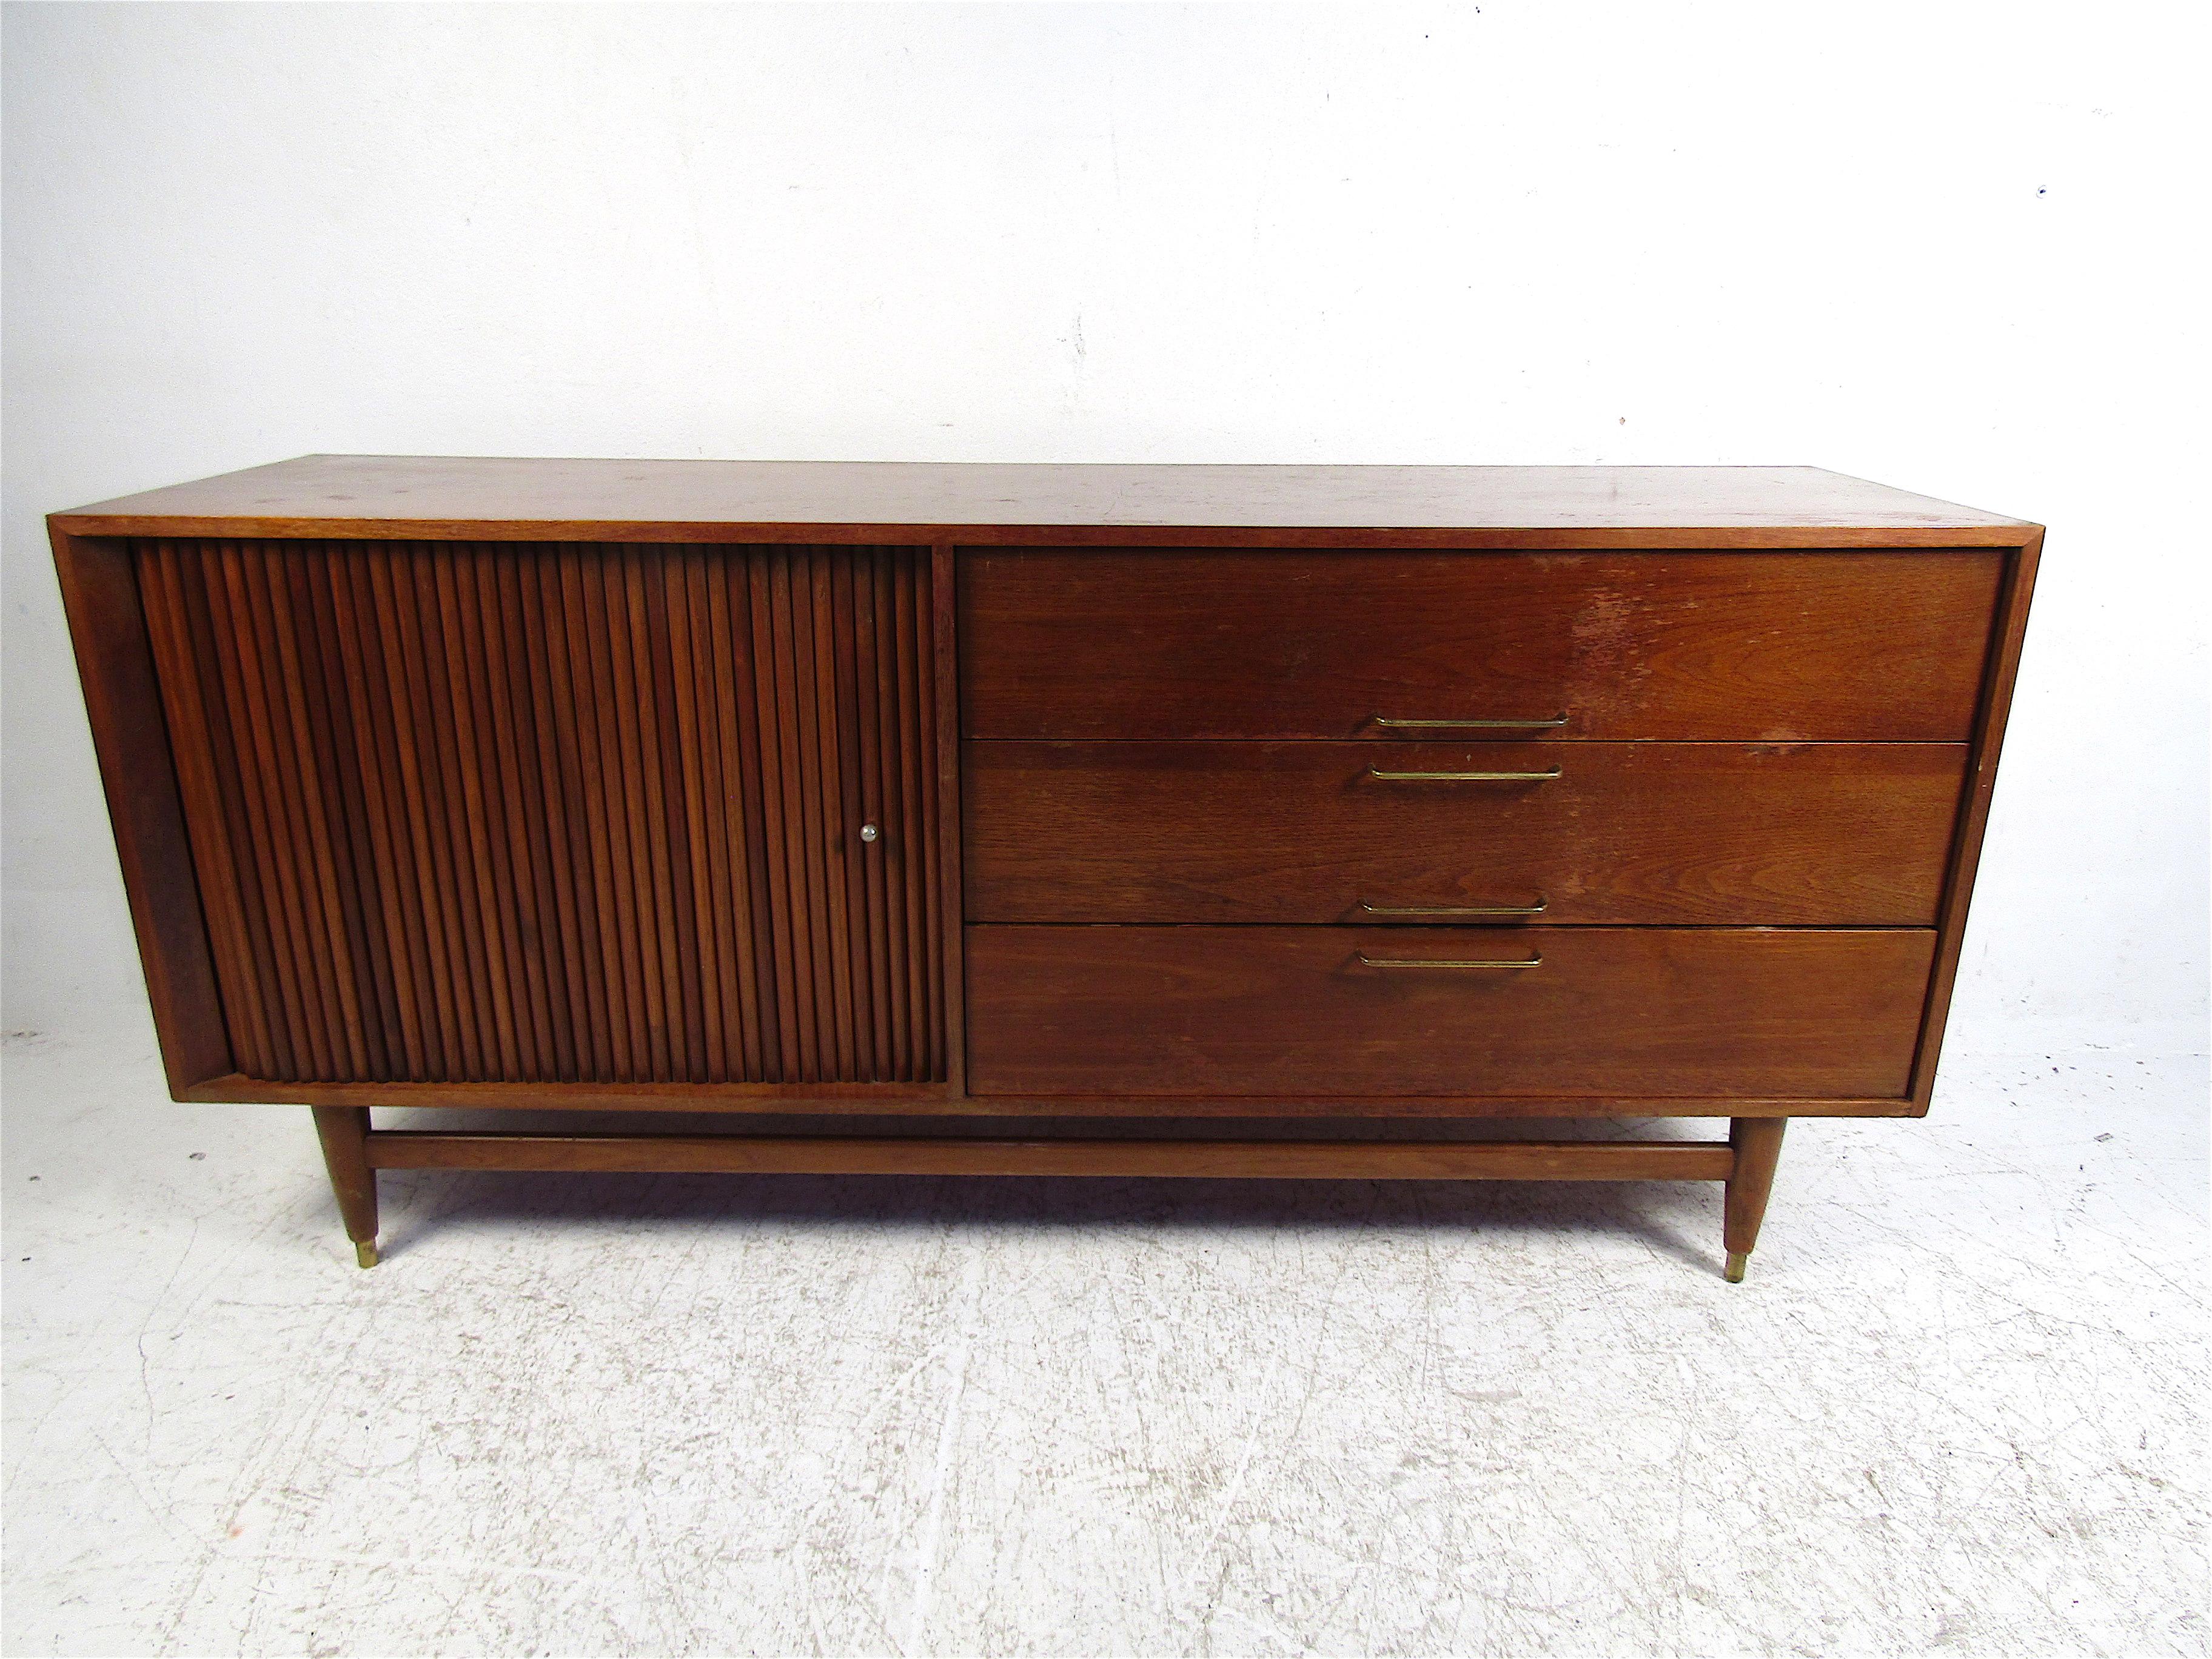 Stylish midcentury dresser with a tambour door and drawers. Well-made piece sure to be a nice addition to any modern interior. Please confirm item location with dealer (NJ or NY).